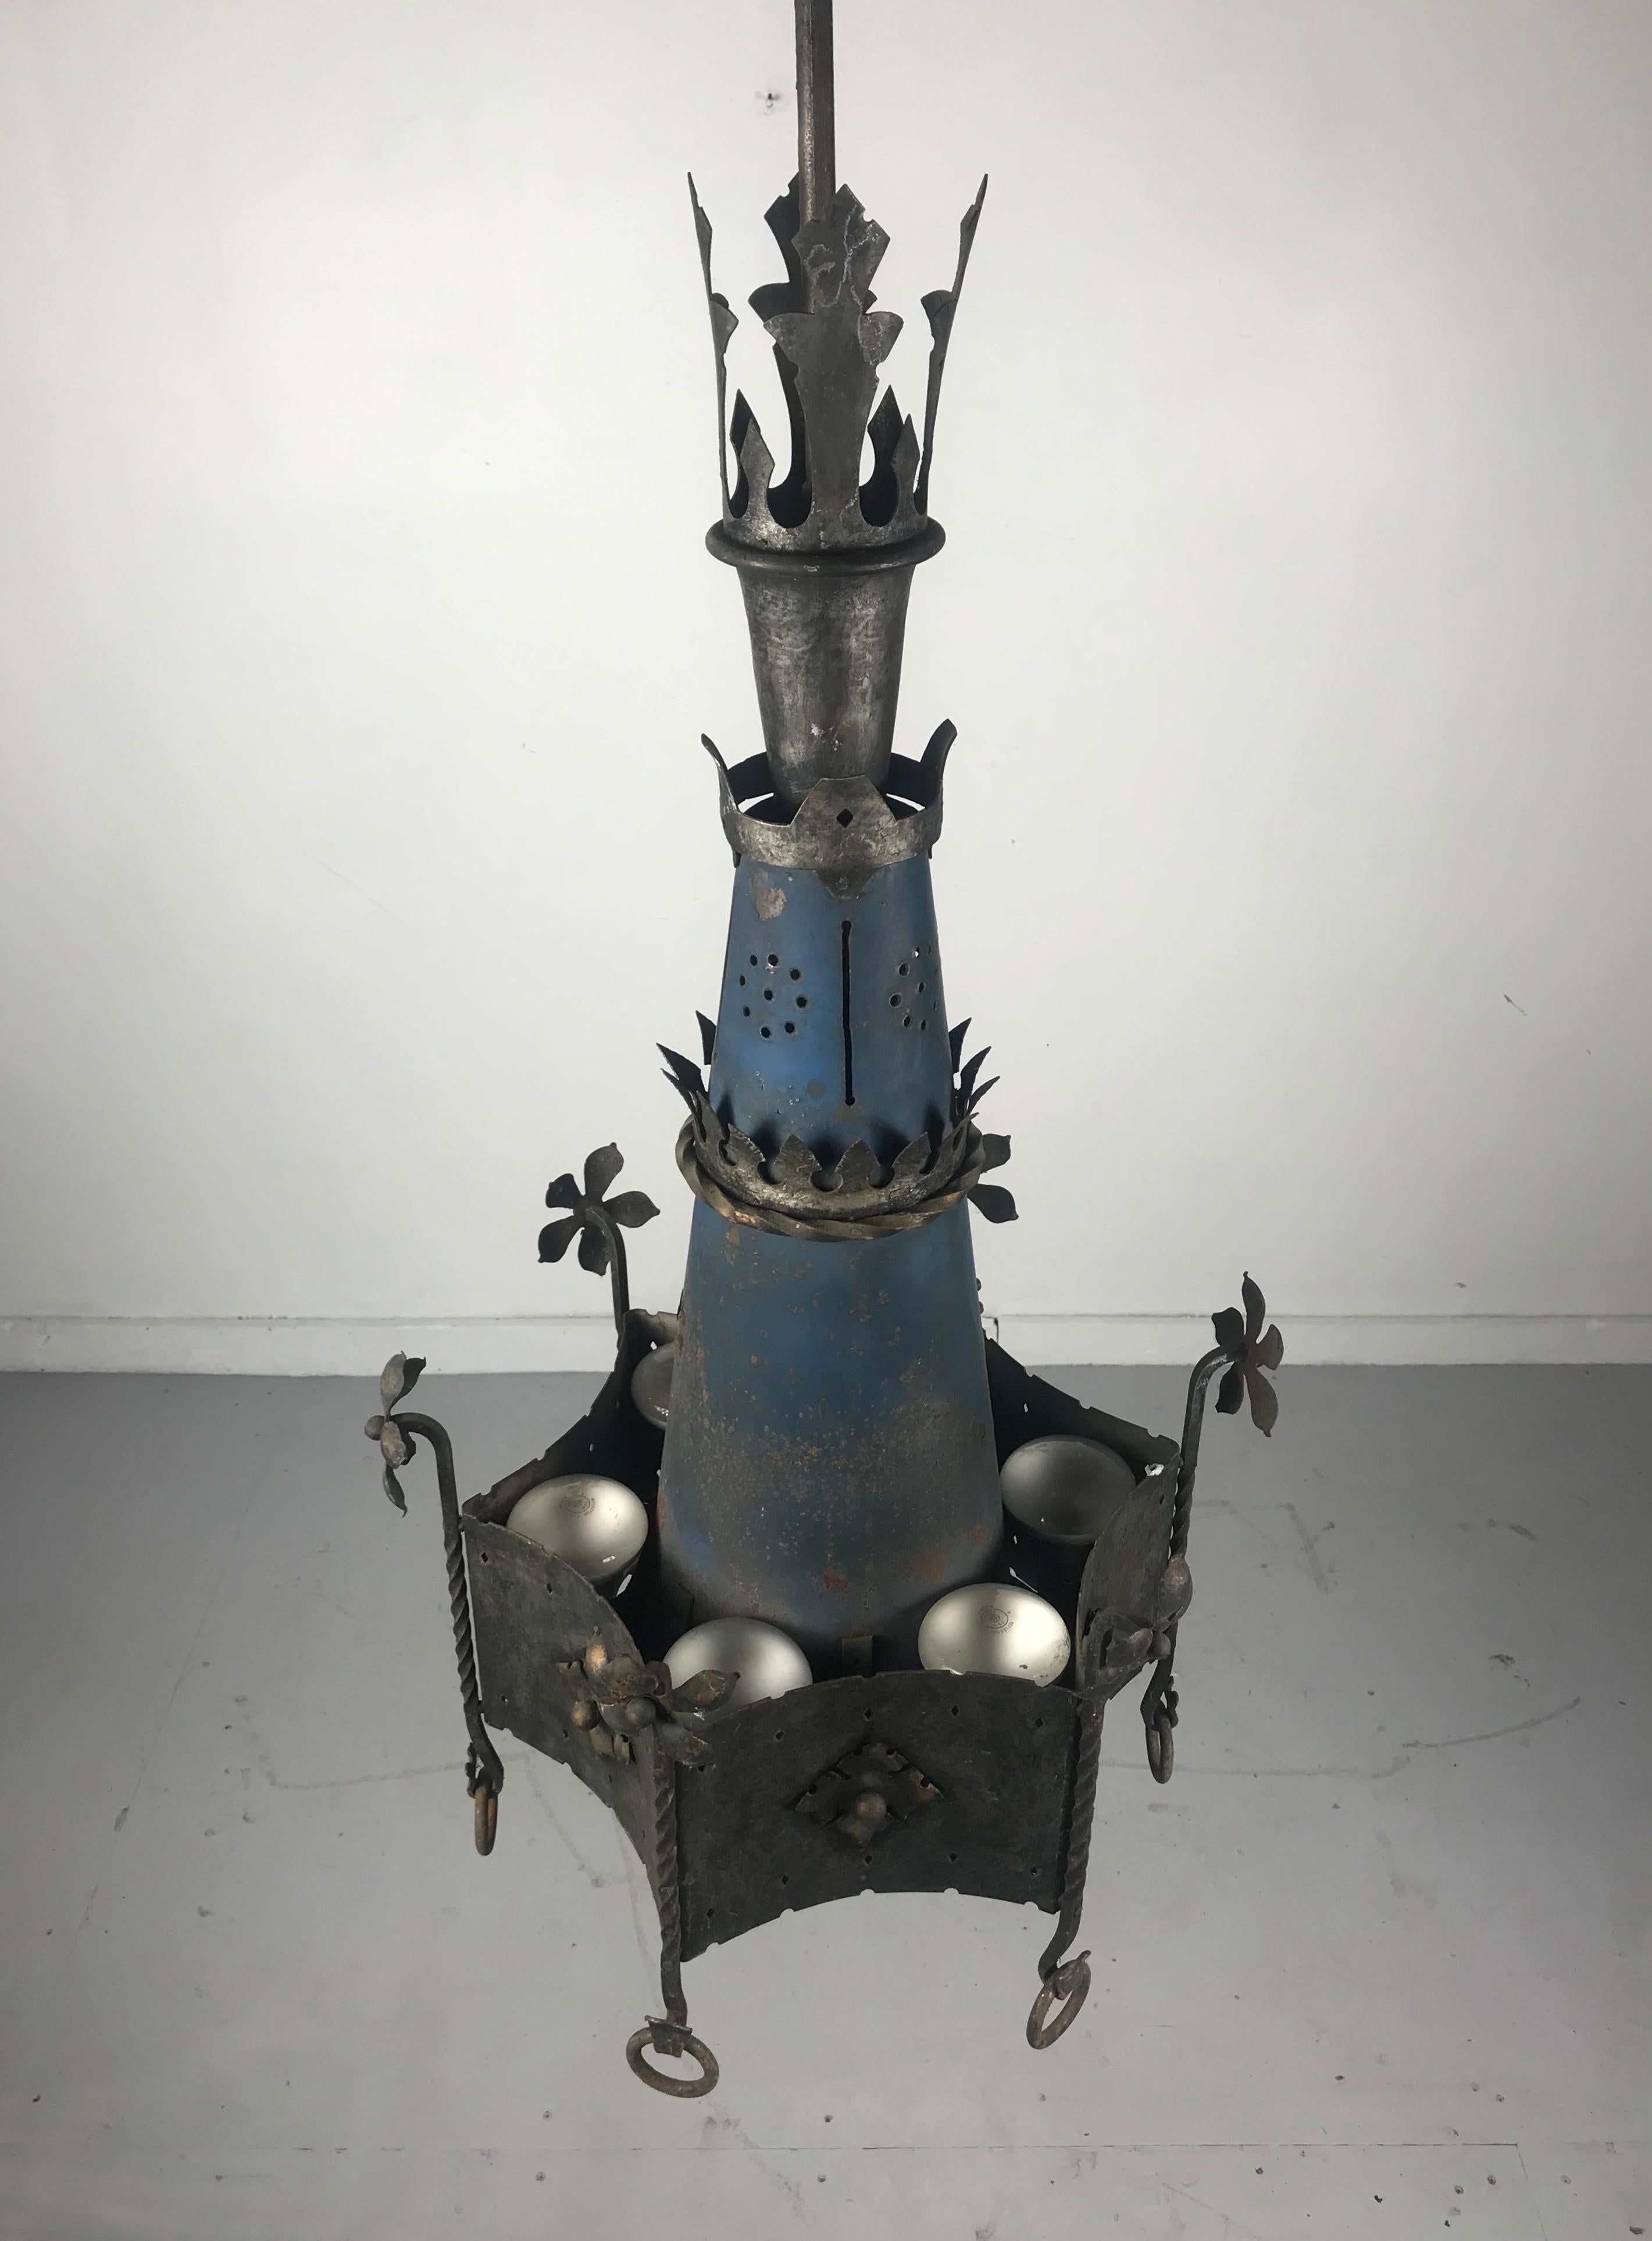 Monumental pair of Gothic Revival hanging chandelier light fixtures / church lighting, Purportedly salvaged from St Pauls Cathedral, Buffalo NY, originally designed and erected by Richard Upjohn, British born American Architect who became most